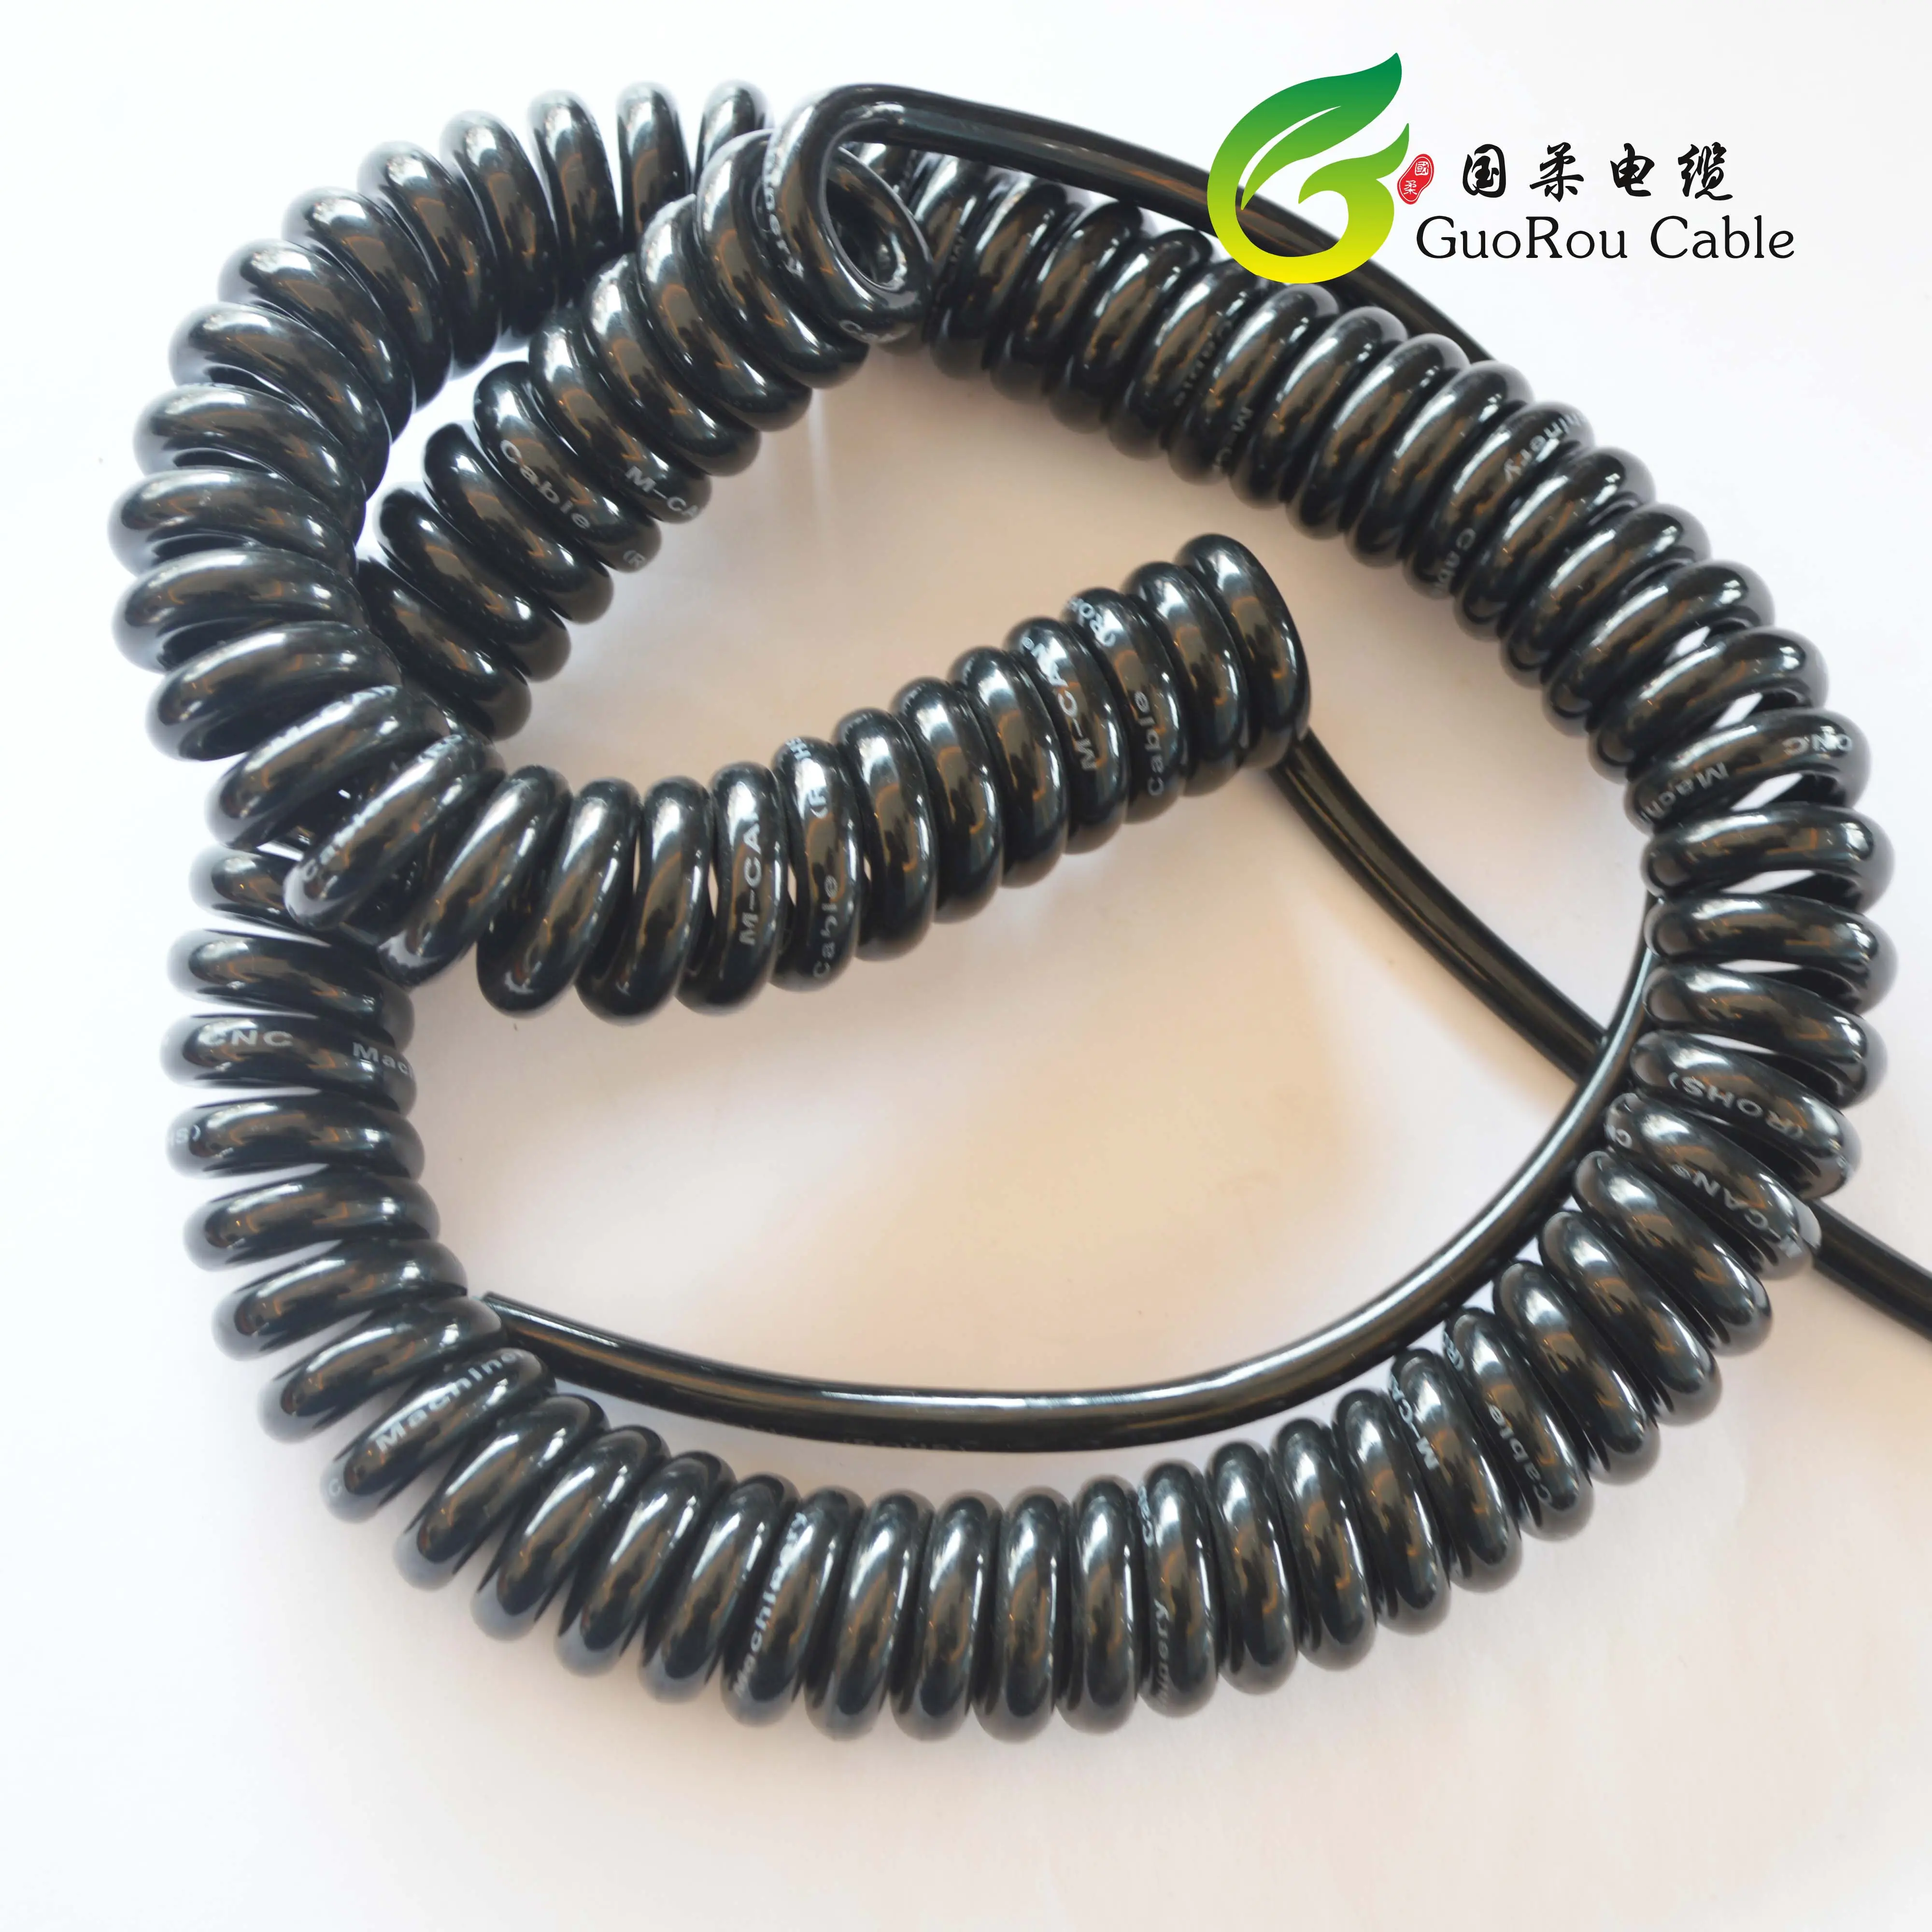 New arrival high quality spiral coiled wire flexible retractable cable